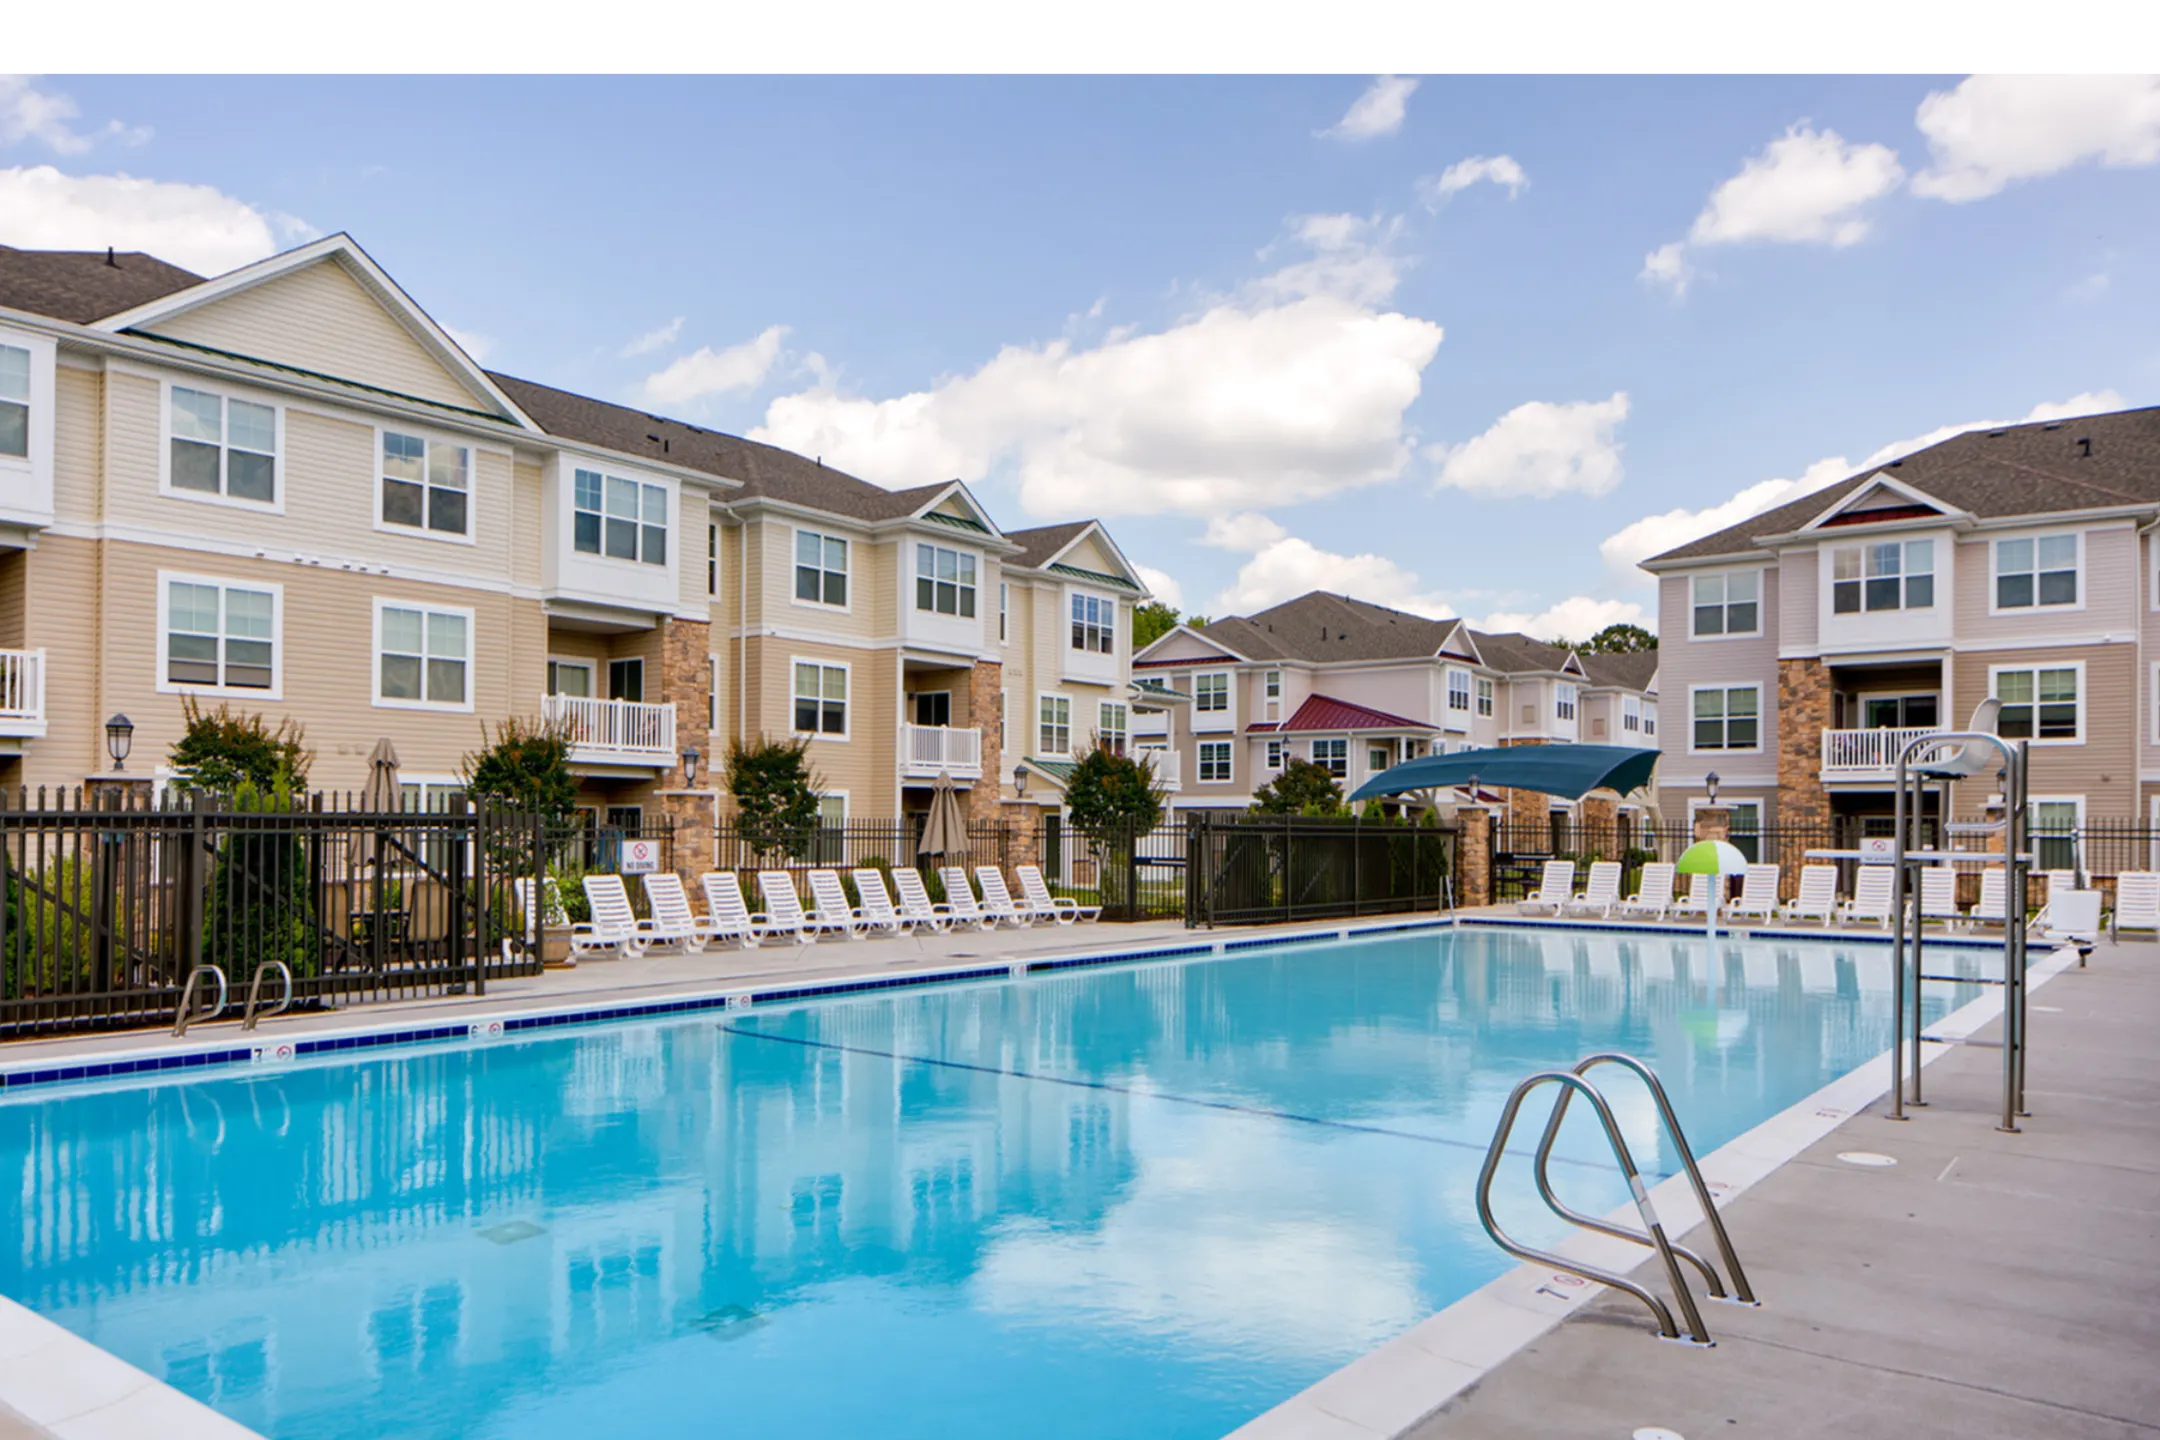 Pool - The Riverside Apartments - Aberdeen, MD